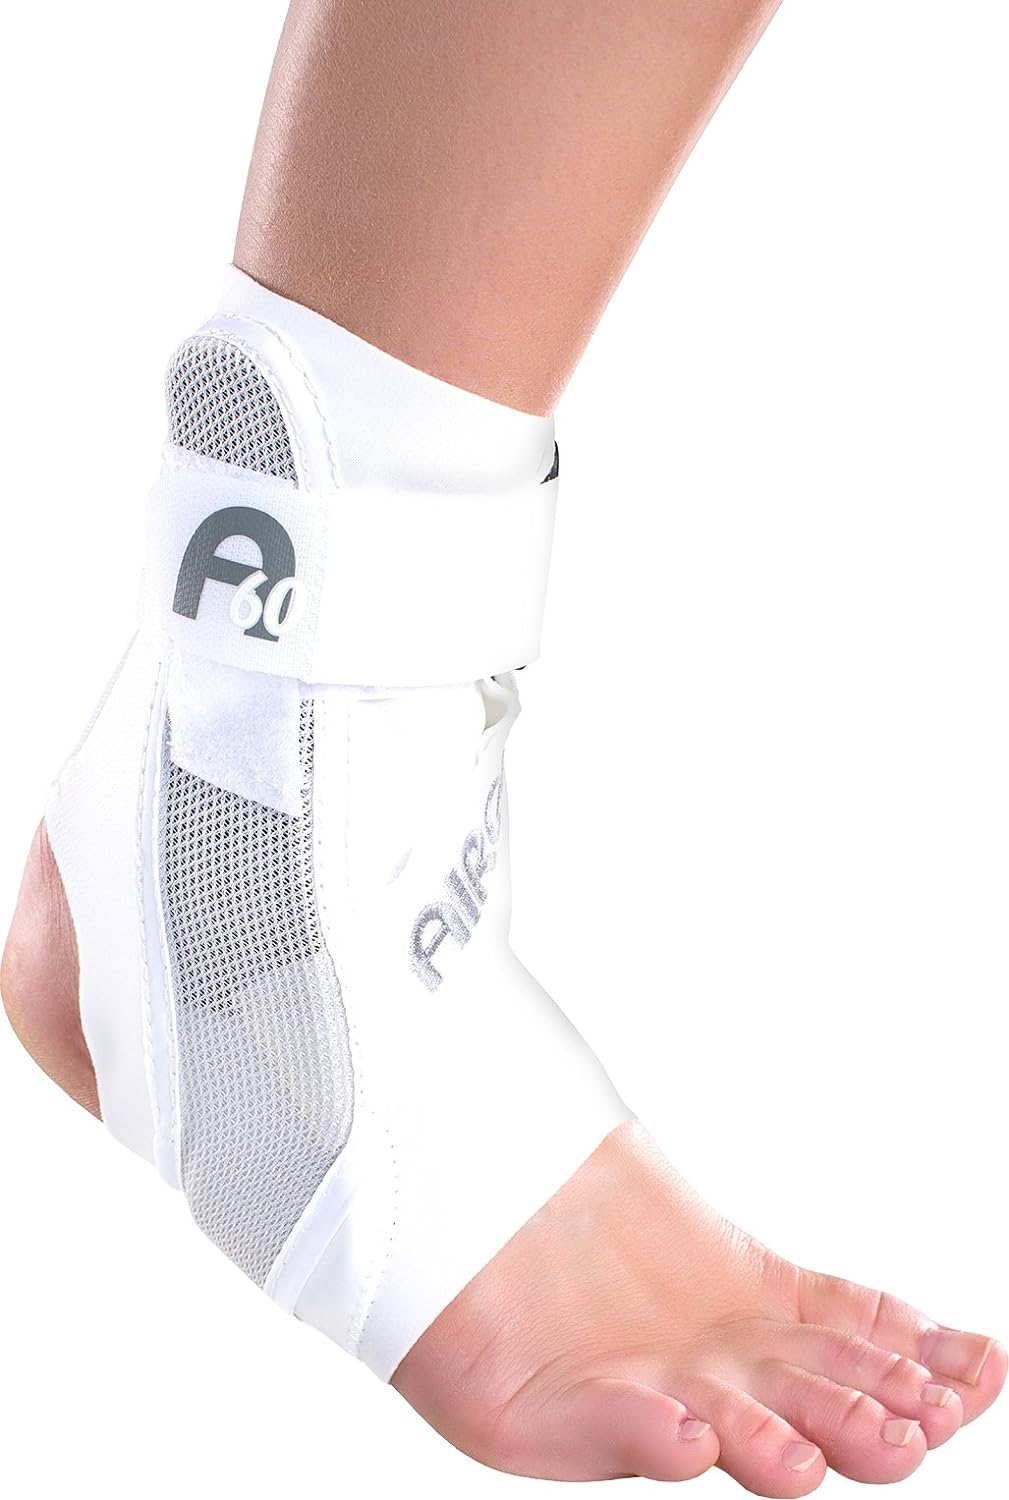 Aircast A60 Ankle Support Brace Review